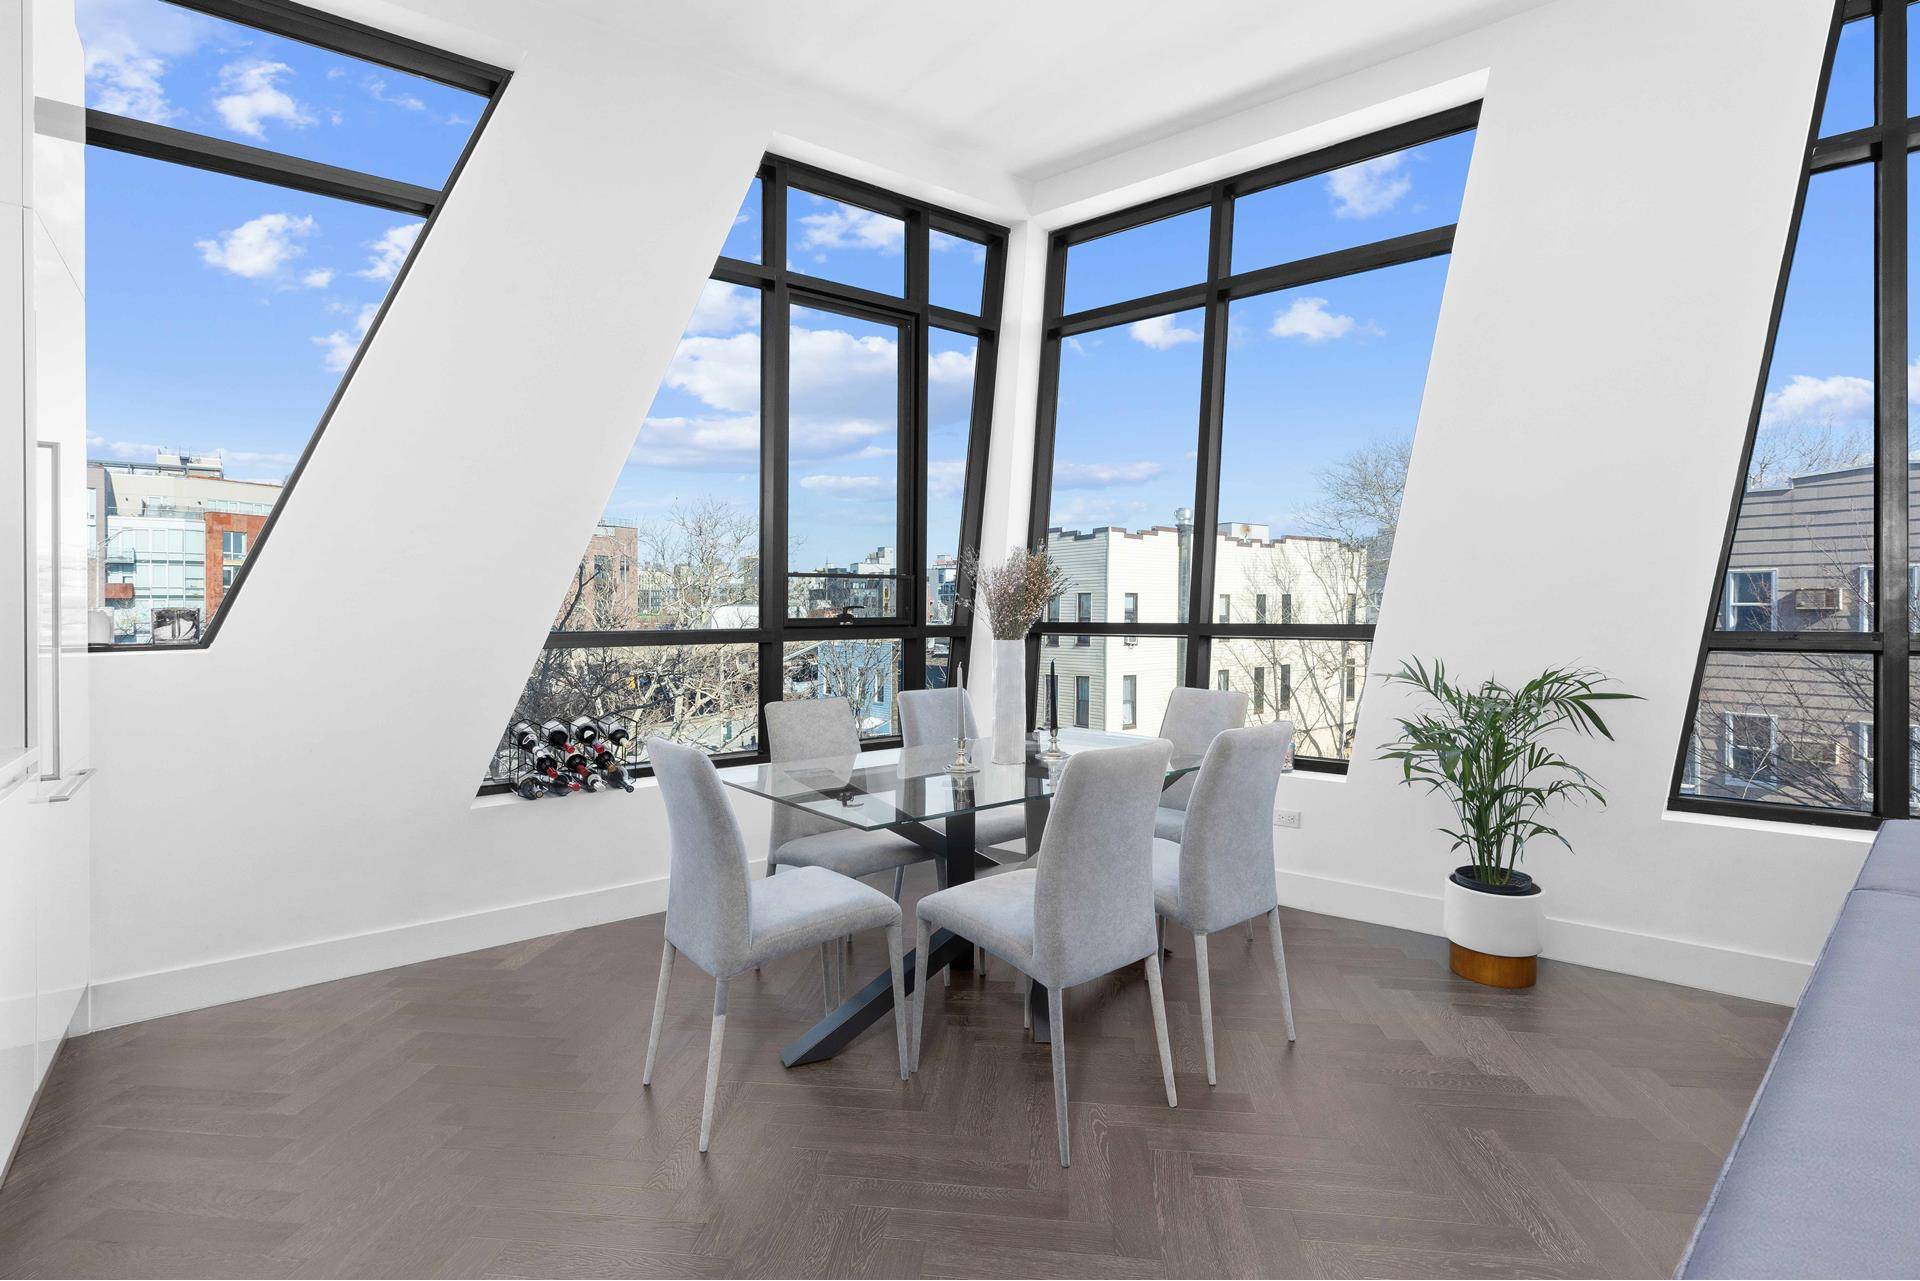 Sophisticated 1 Bed 1 Bath with an expansive living and dining area that enjoys soaring 12' high ceilings, 10' high doors and Tierra herringbone European oak floors.